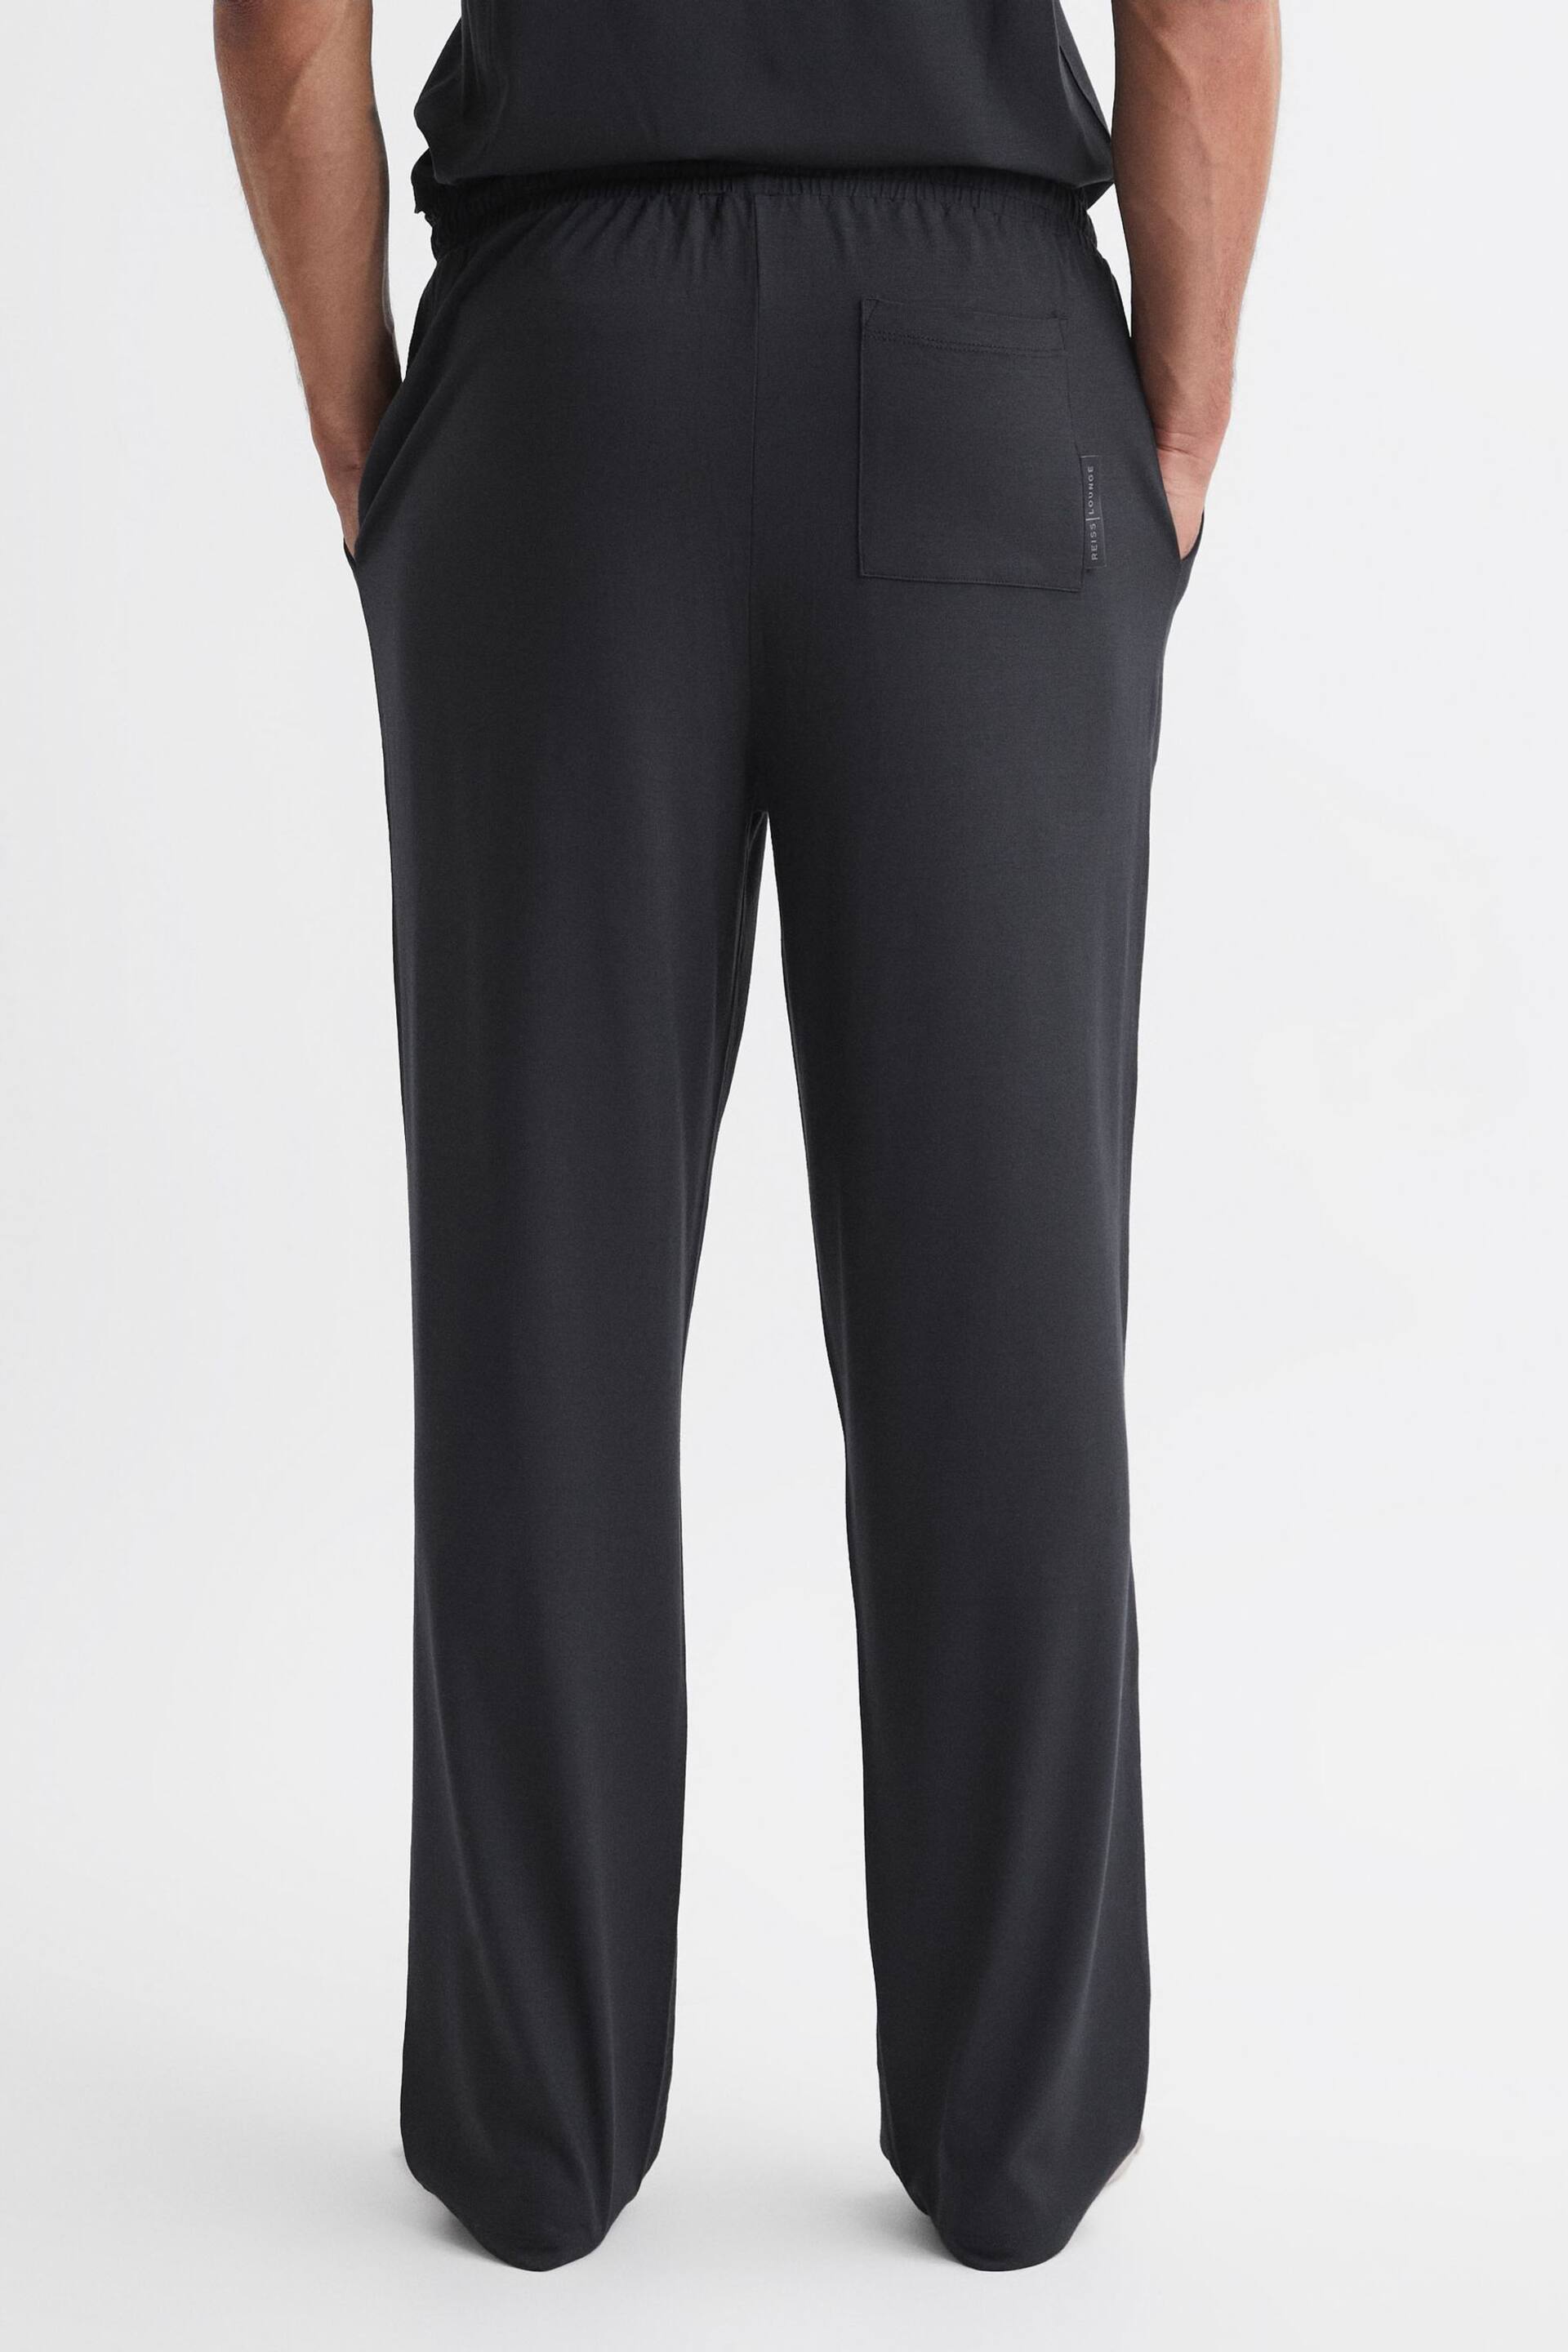 Reiss Charcoal Norfolk Jersey Drawstring Joggers - Image 5 of 5